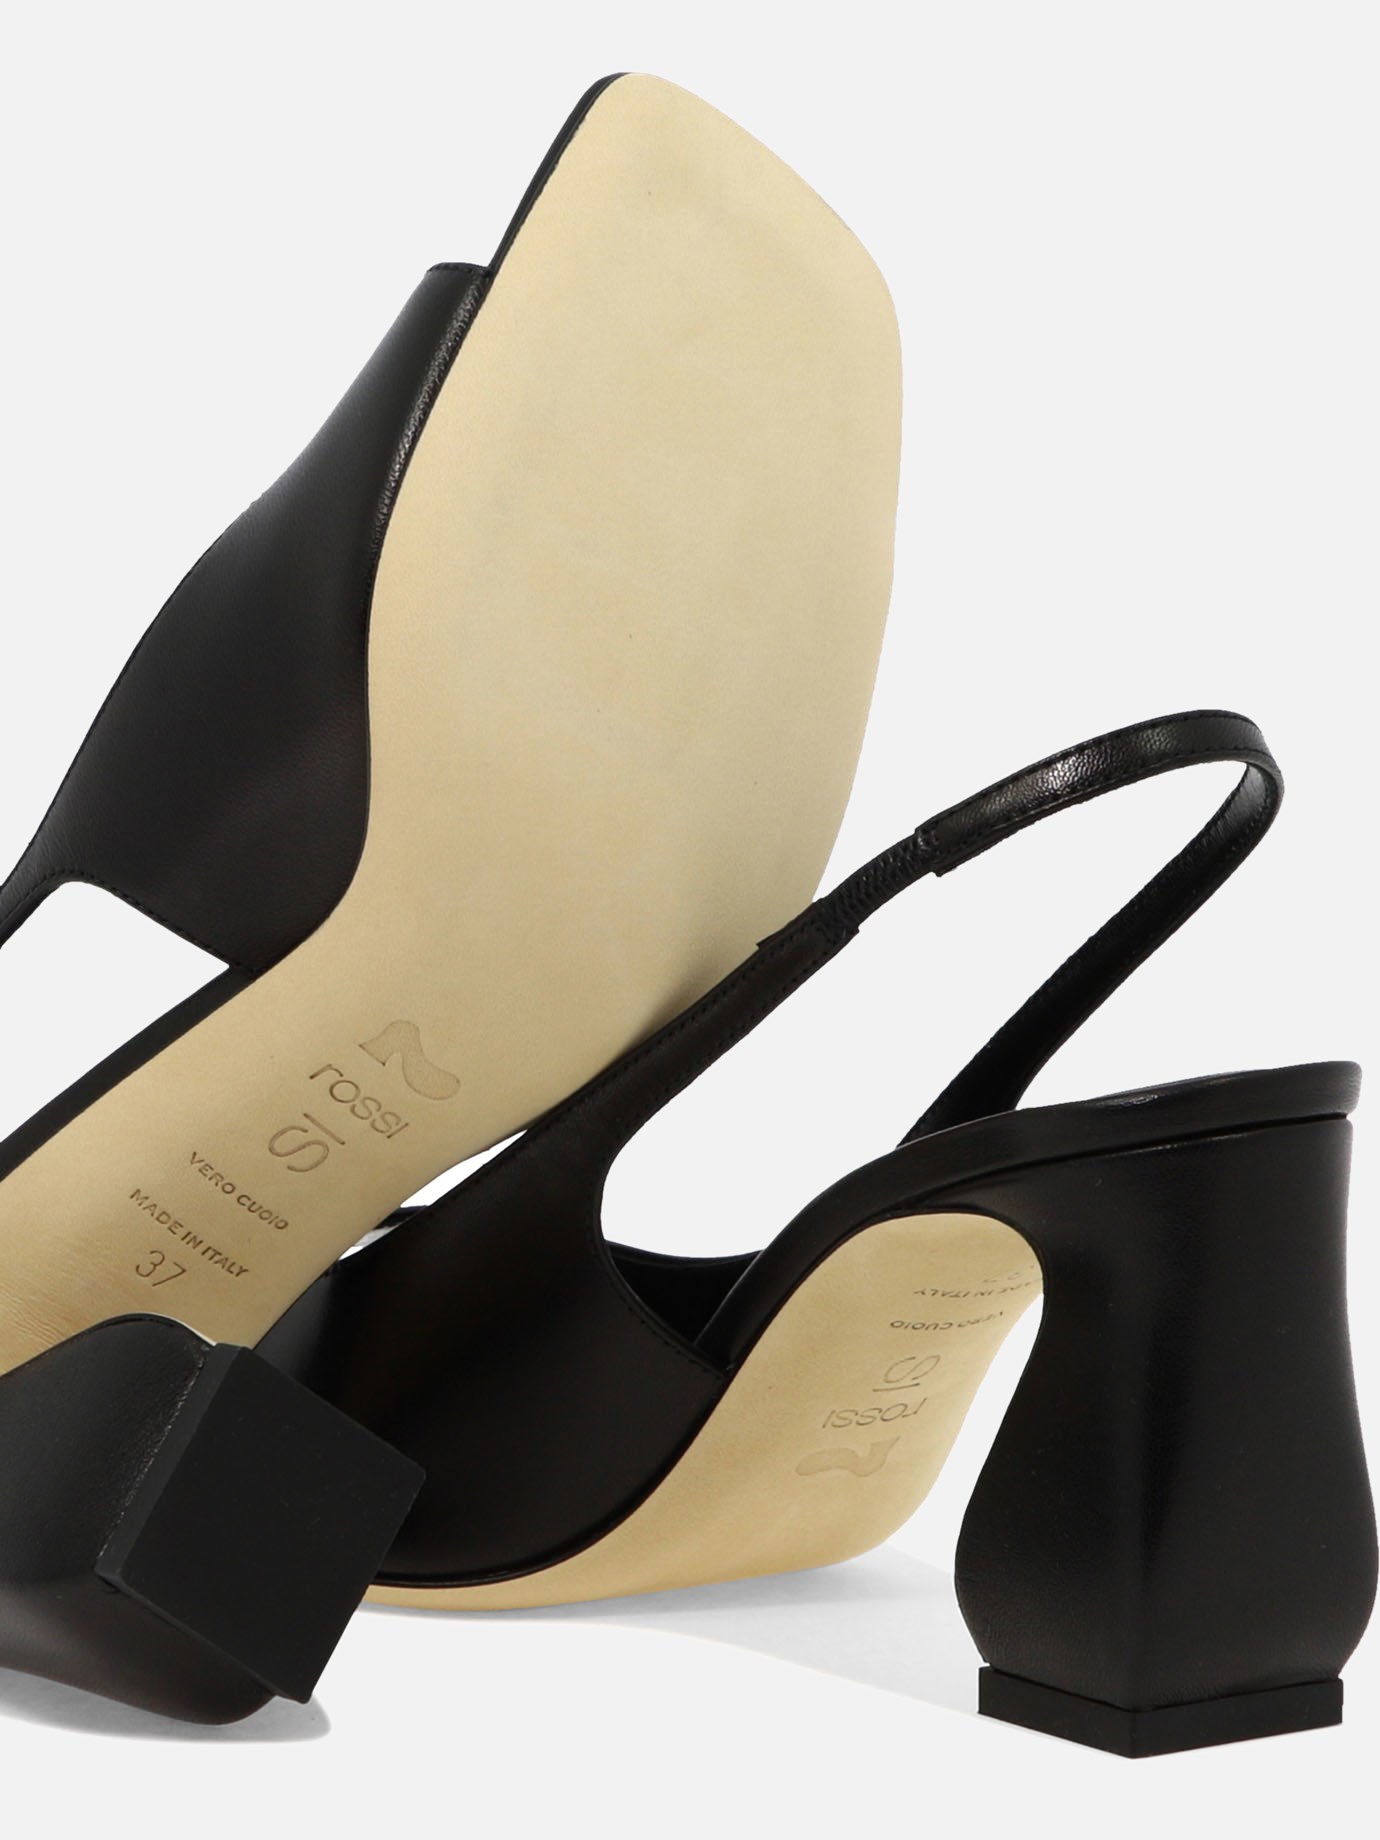 Shaped heel sandals by Si Rossi